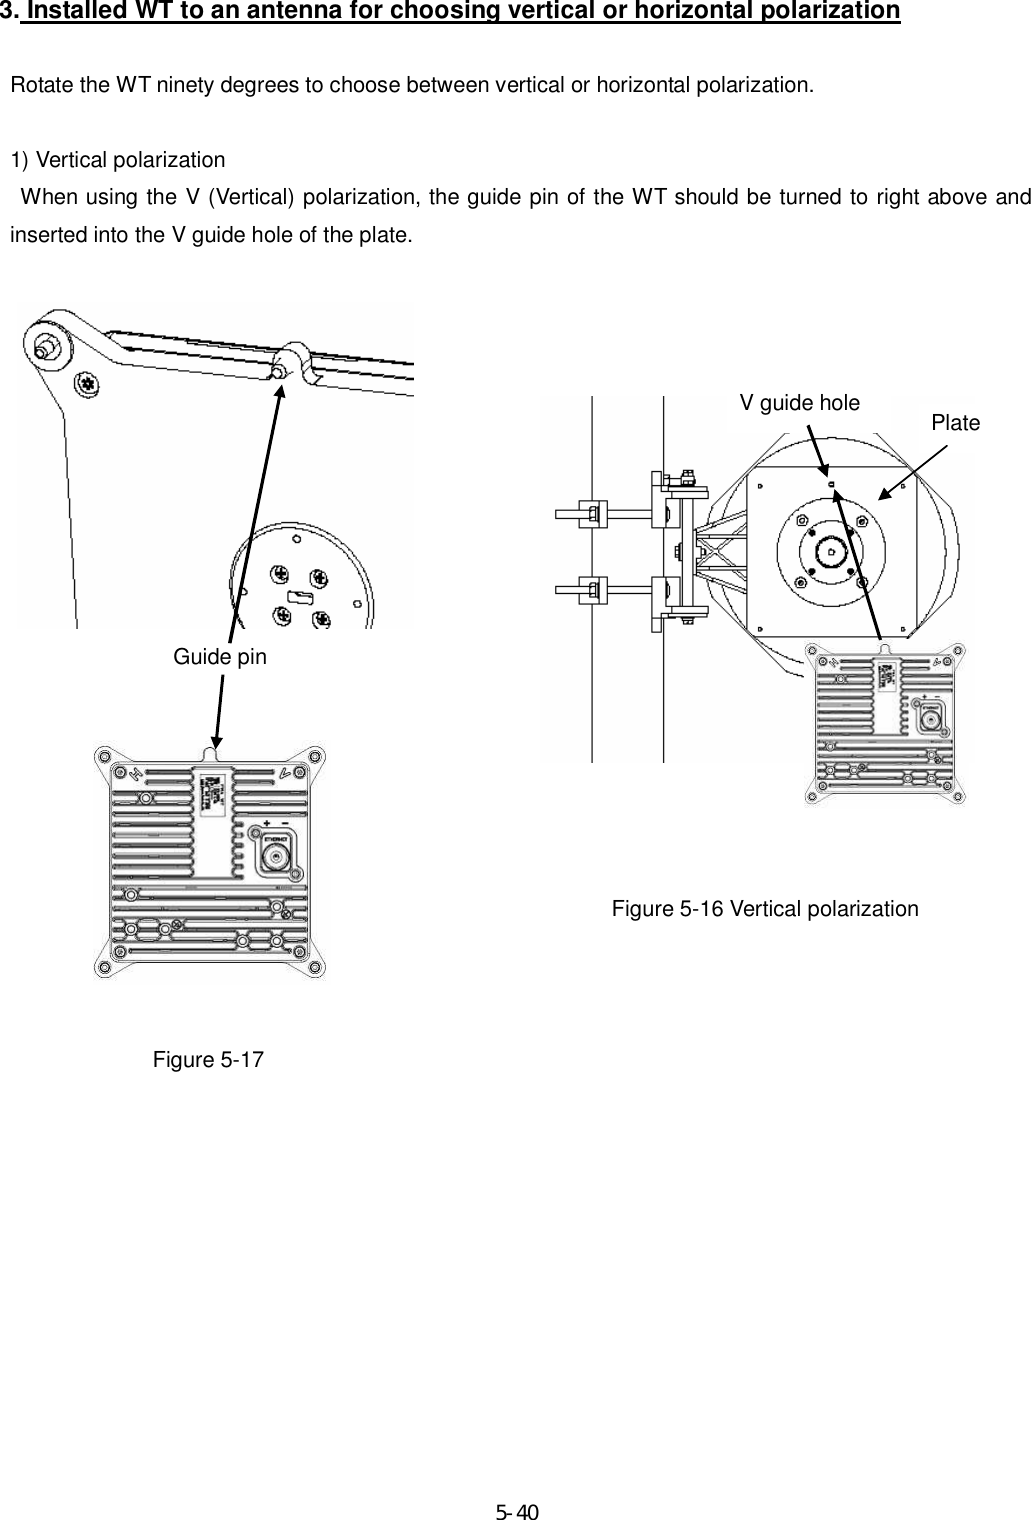     5-40 3. Installed WT to an antenna for choosing vertical or horizontal polarization  Rotate the WT ninety degrees to choose between vertical or horizontal polarization.  1) Vertical polarization     When using the V (Vertical) polarization, the guide pin of the WT should be turned to right above and inserted into the V guide hole of the plate.                                Figure 5-16 Vertical polarization           Figure 5-17           V guide hole  Plate Guide pin 